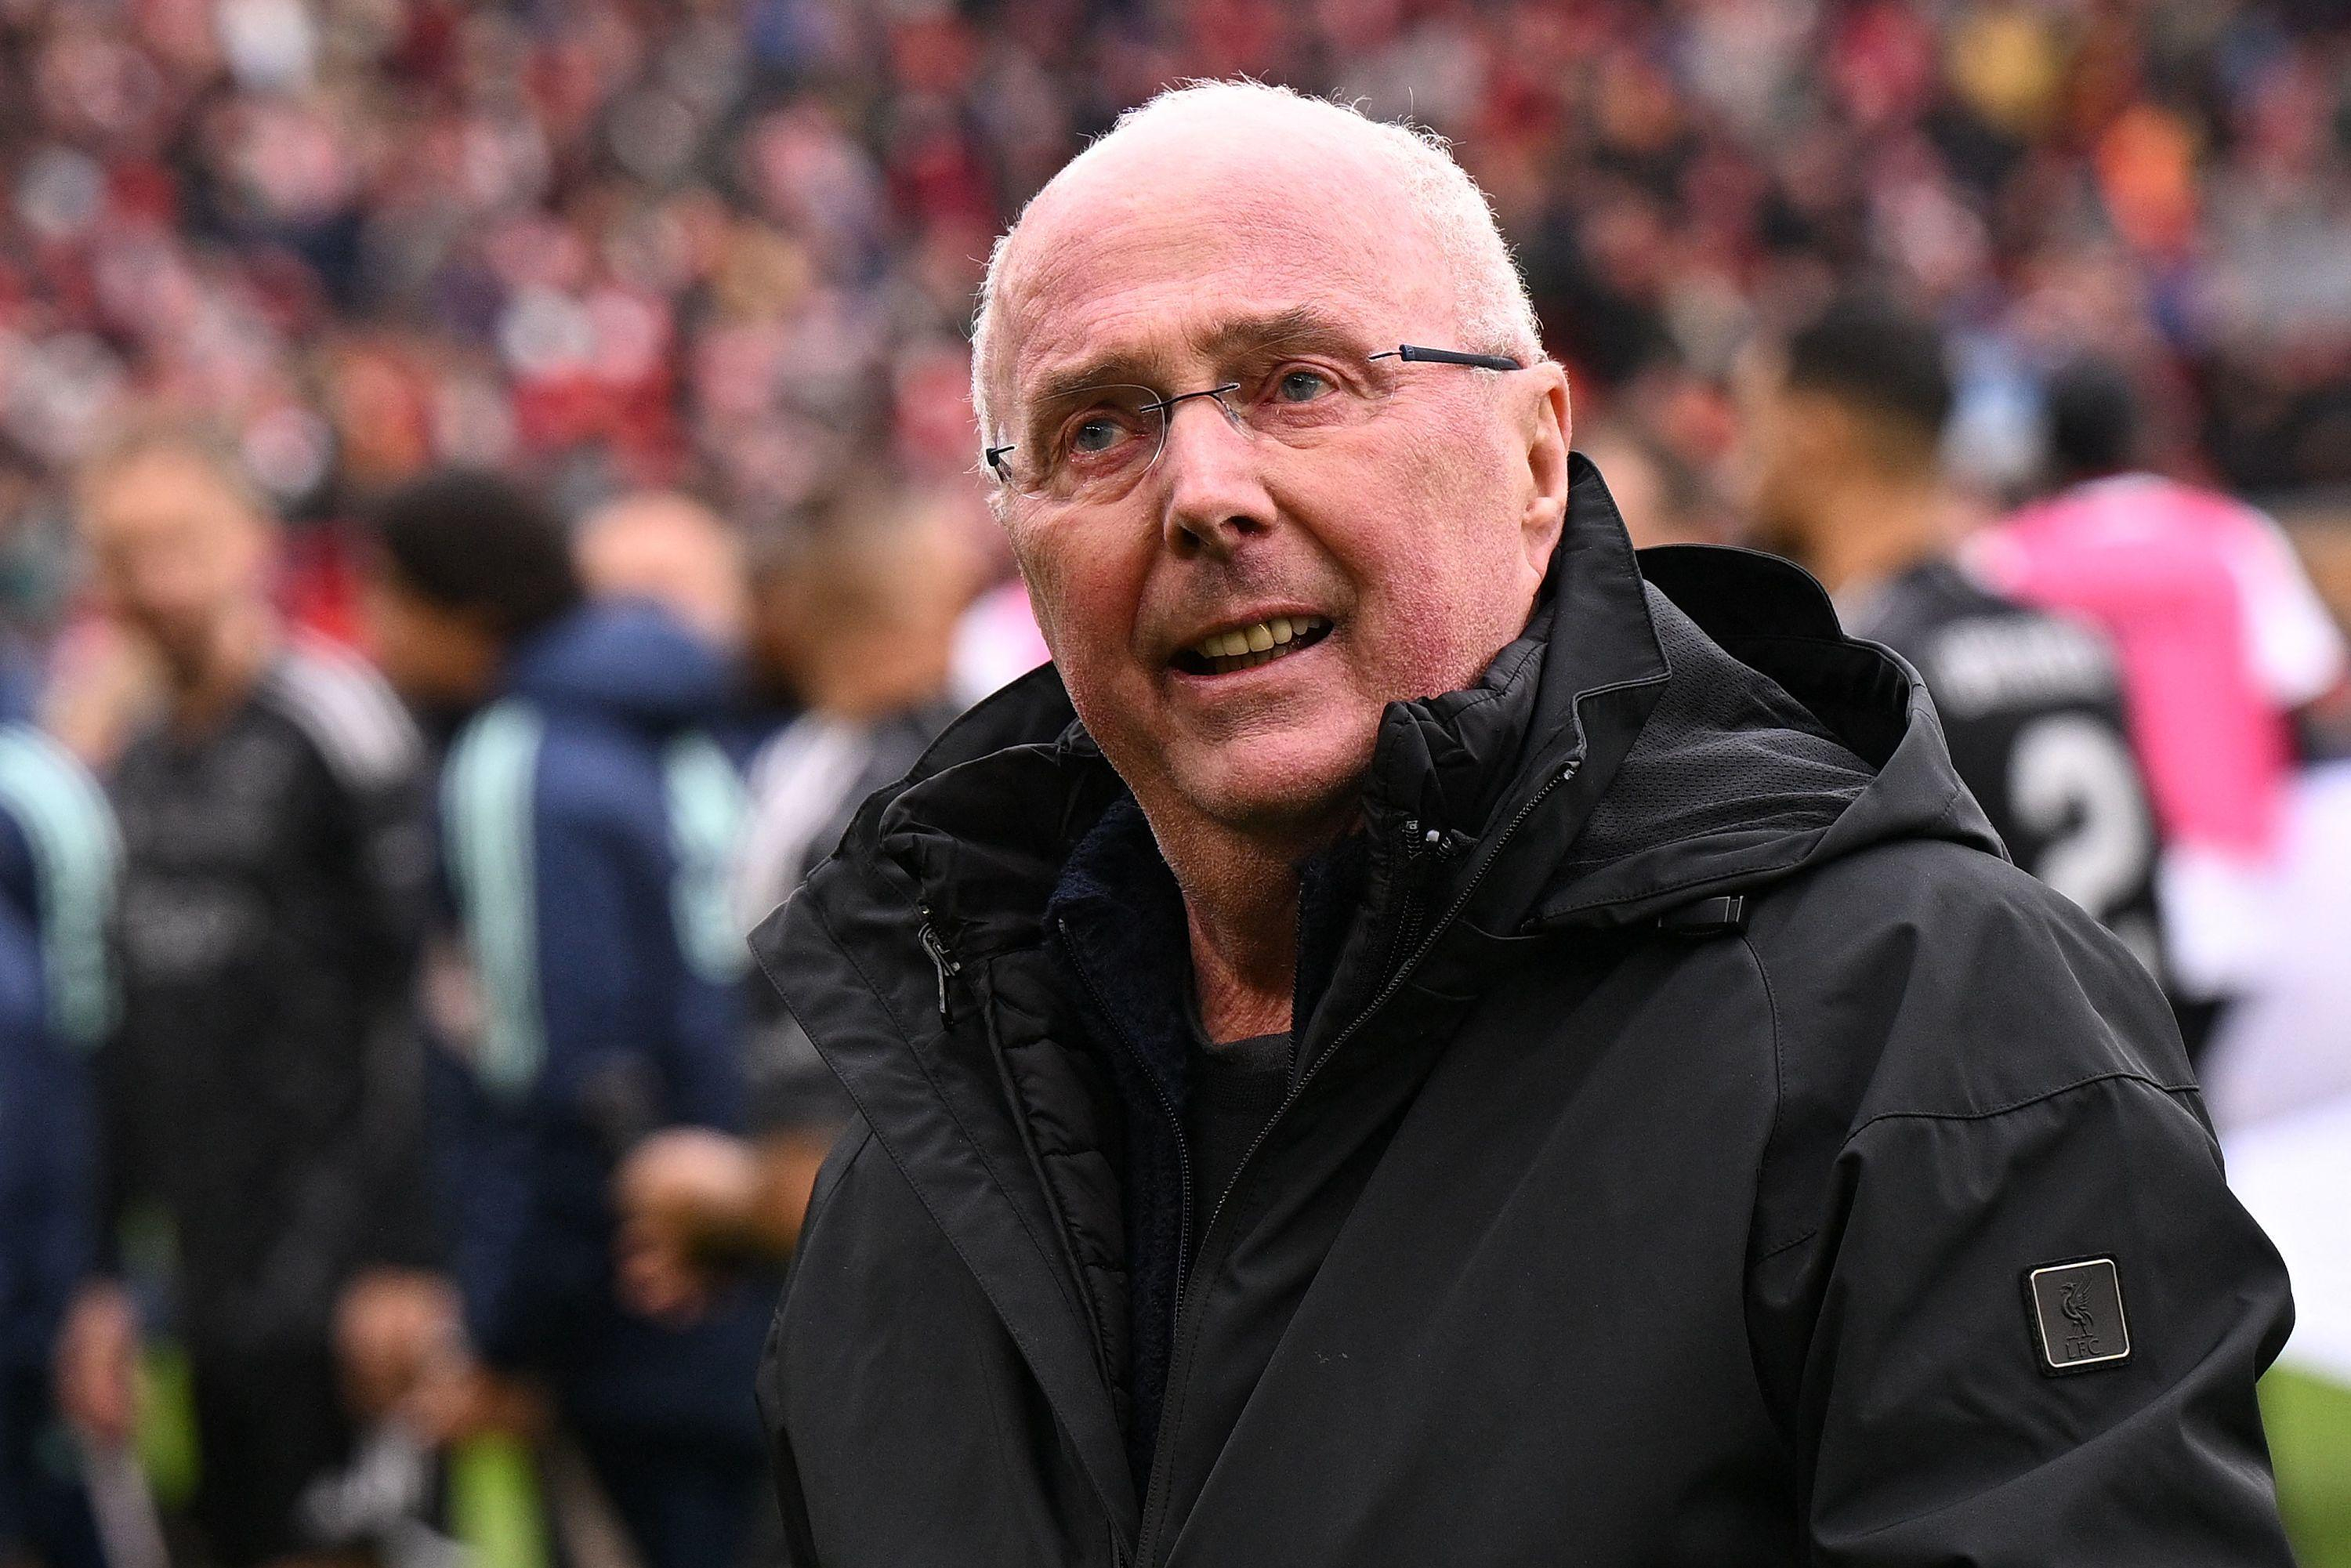 Football: suffering from cancer, former England coach Eriksson coached Liverpool at Anfield for a match